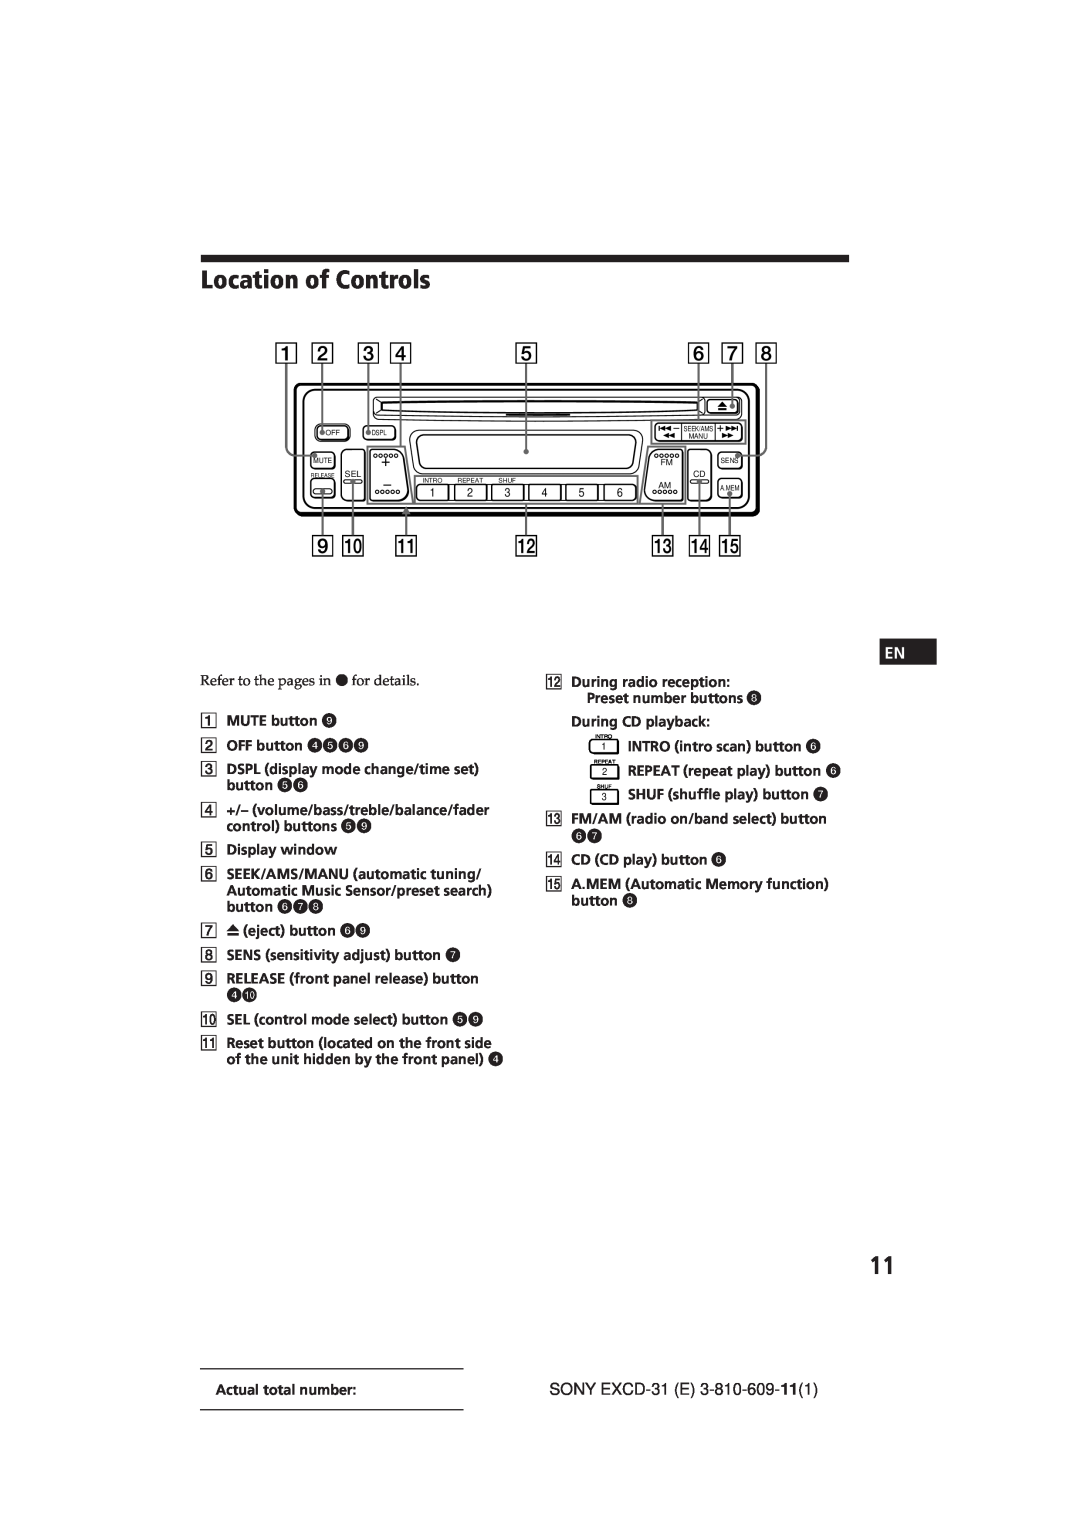 Sony EXCD-31 manual Location of Controls 